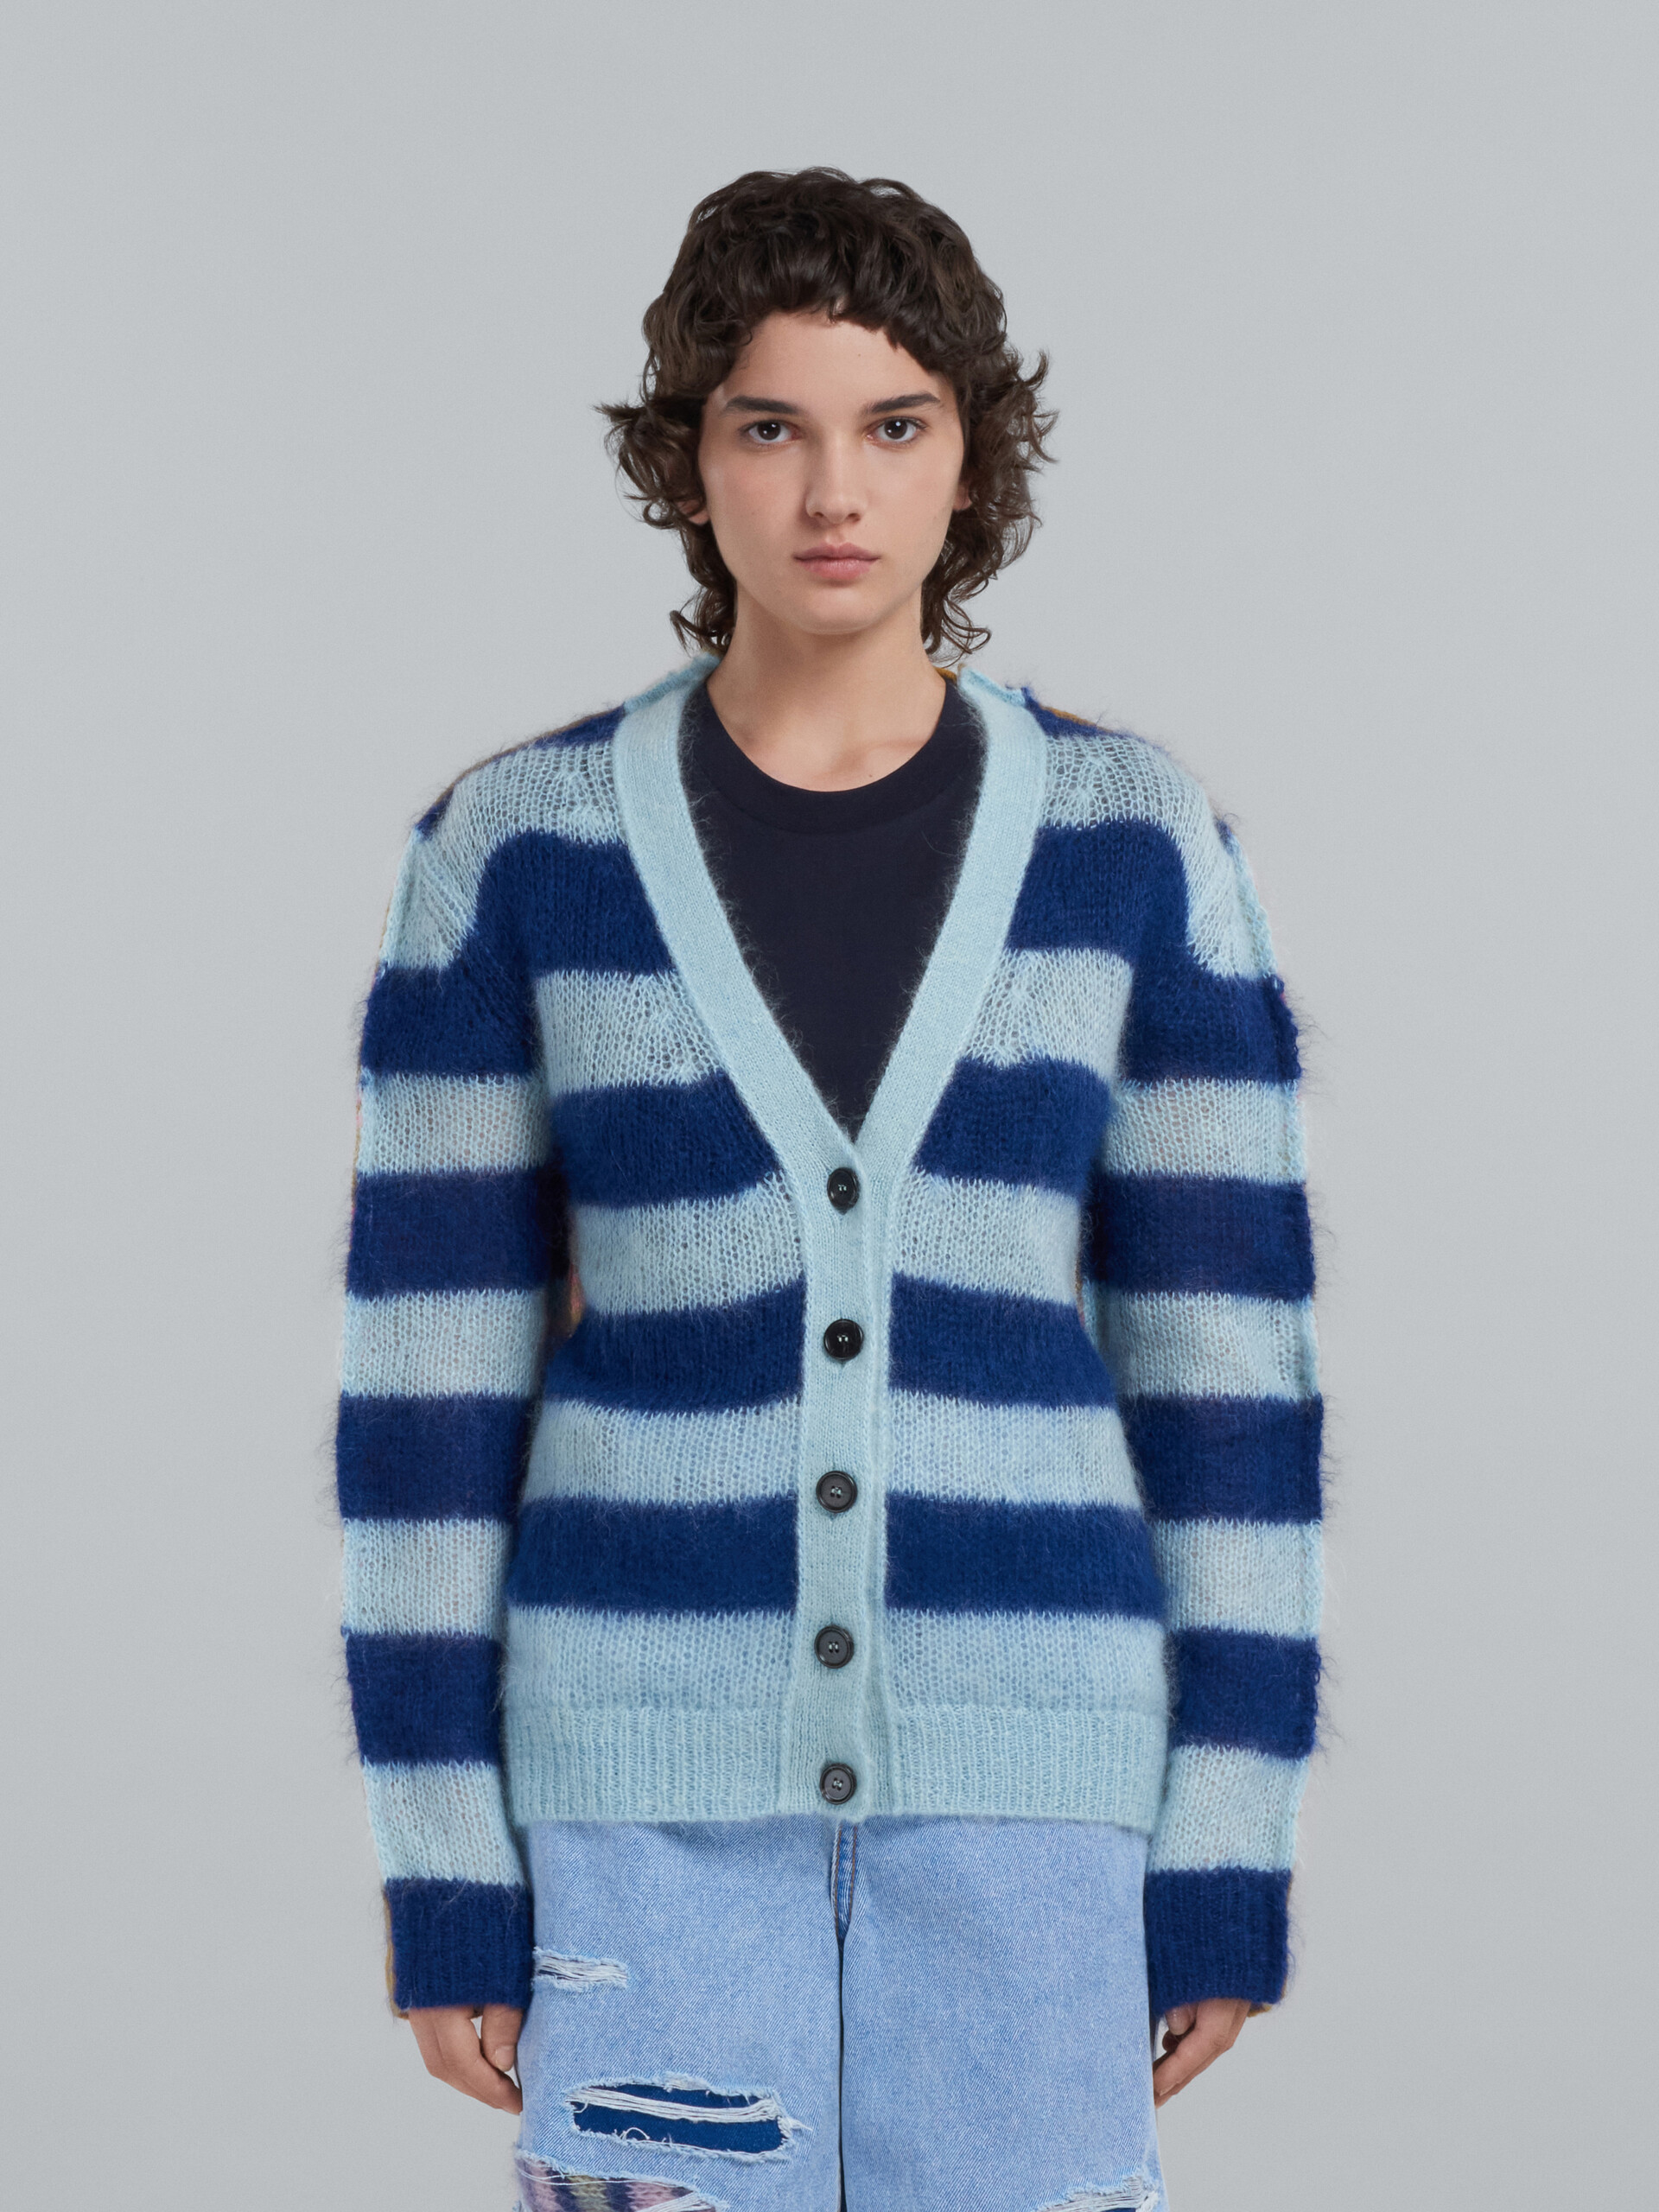 Mohair and wool cardigan with multicolour stripes - Pullovers - Image 2